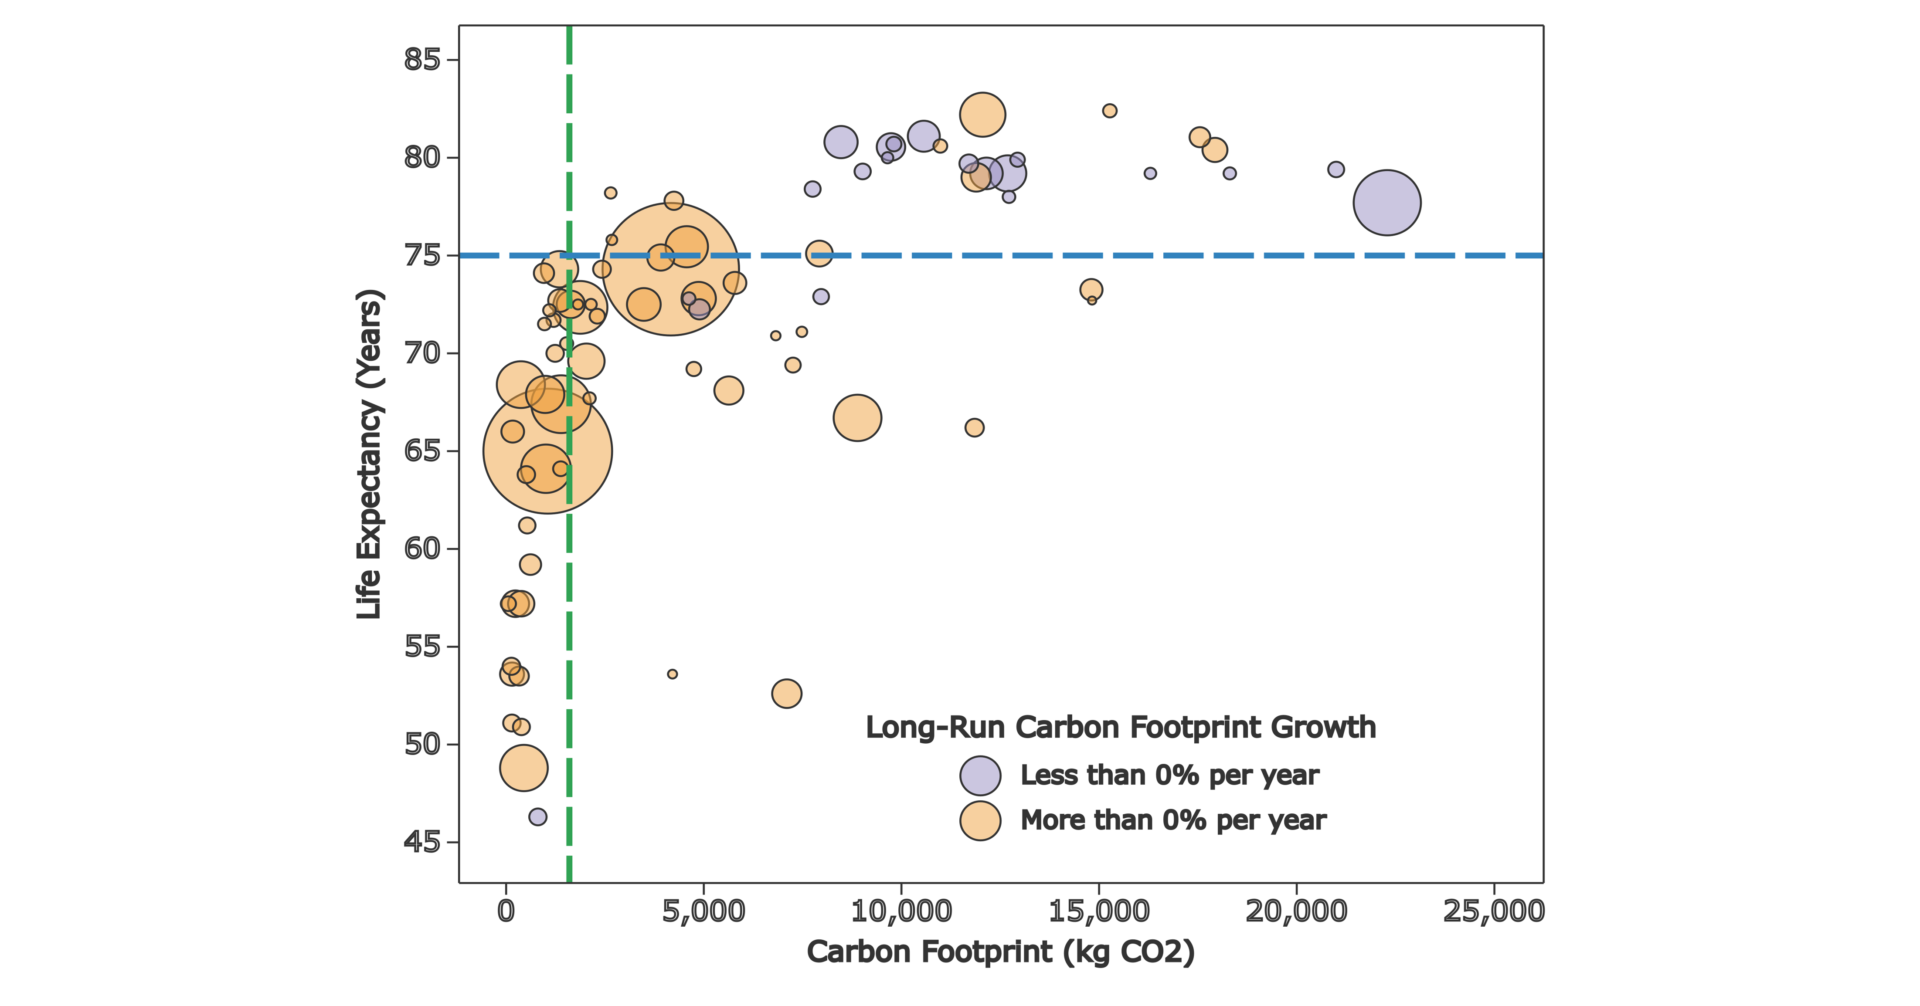 Scatterplot of carbon footprint growth versus life expectancy